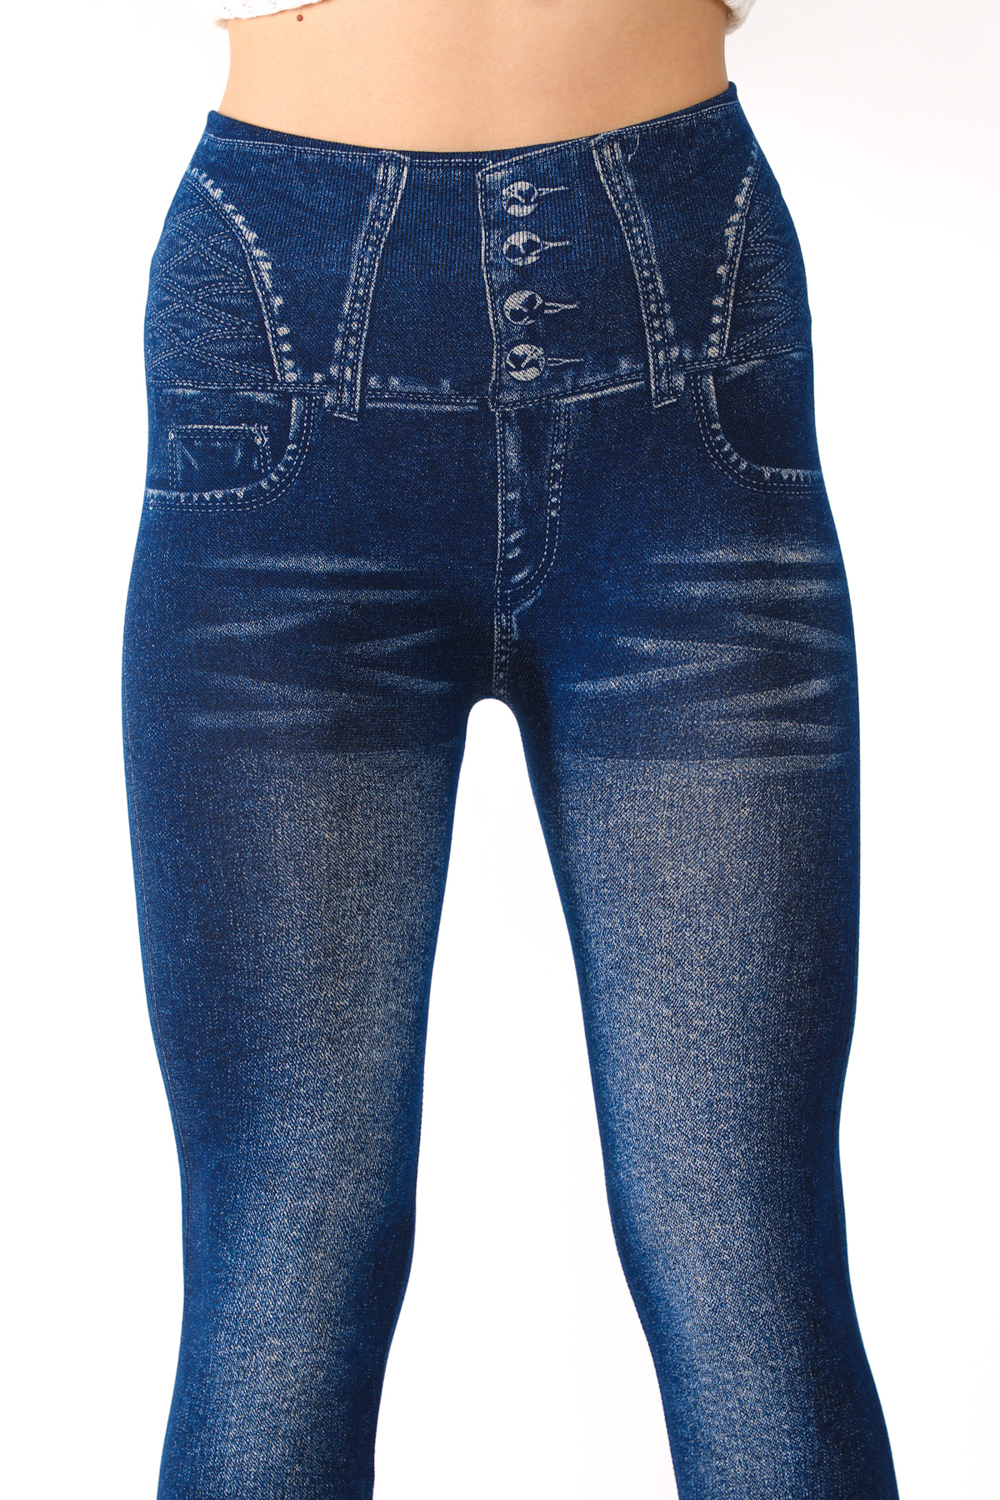 Denim Leggings with Fake Pockets and Button Pattern - 7